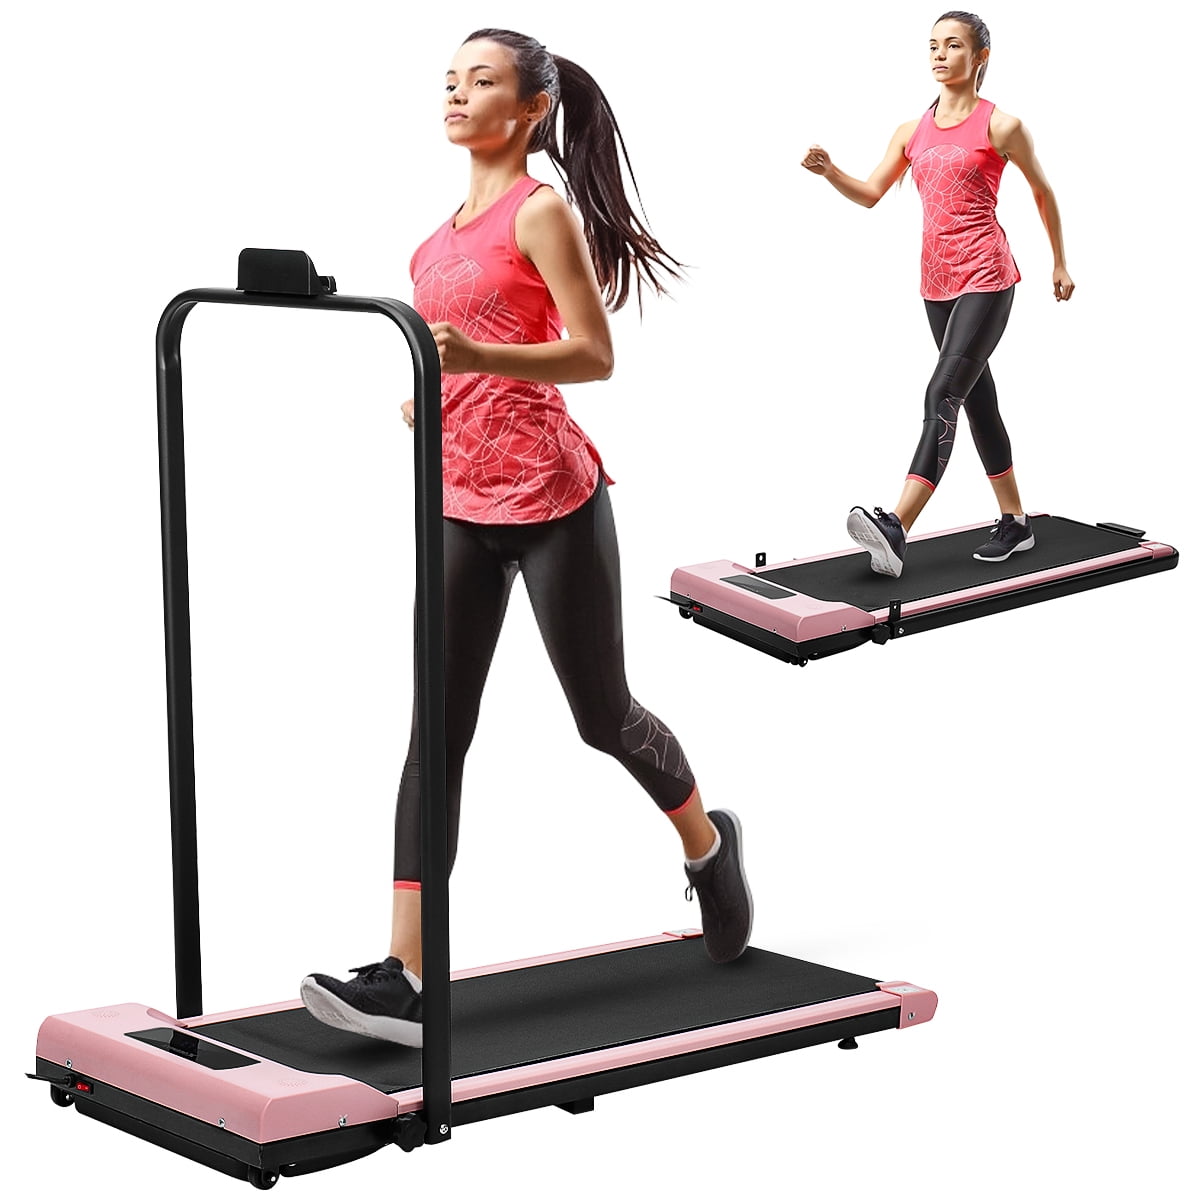 Remote Control Installation-Free Goplus 2 in 1 Folding Treadmill with Dual Display Bluetooth Speaker Walking Jogging Machine for Home/Office Use 2.25HP Under Desk Electric Pad Treadmill 